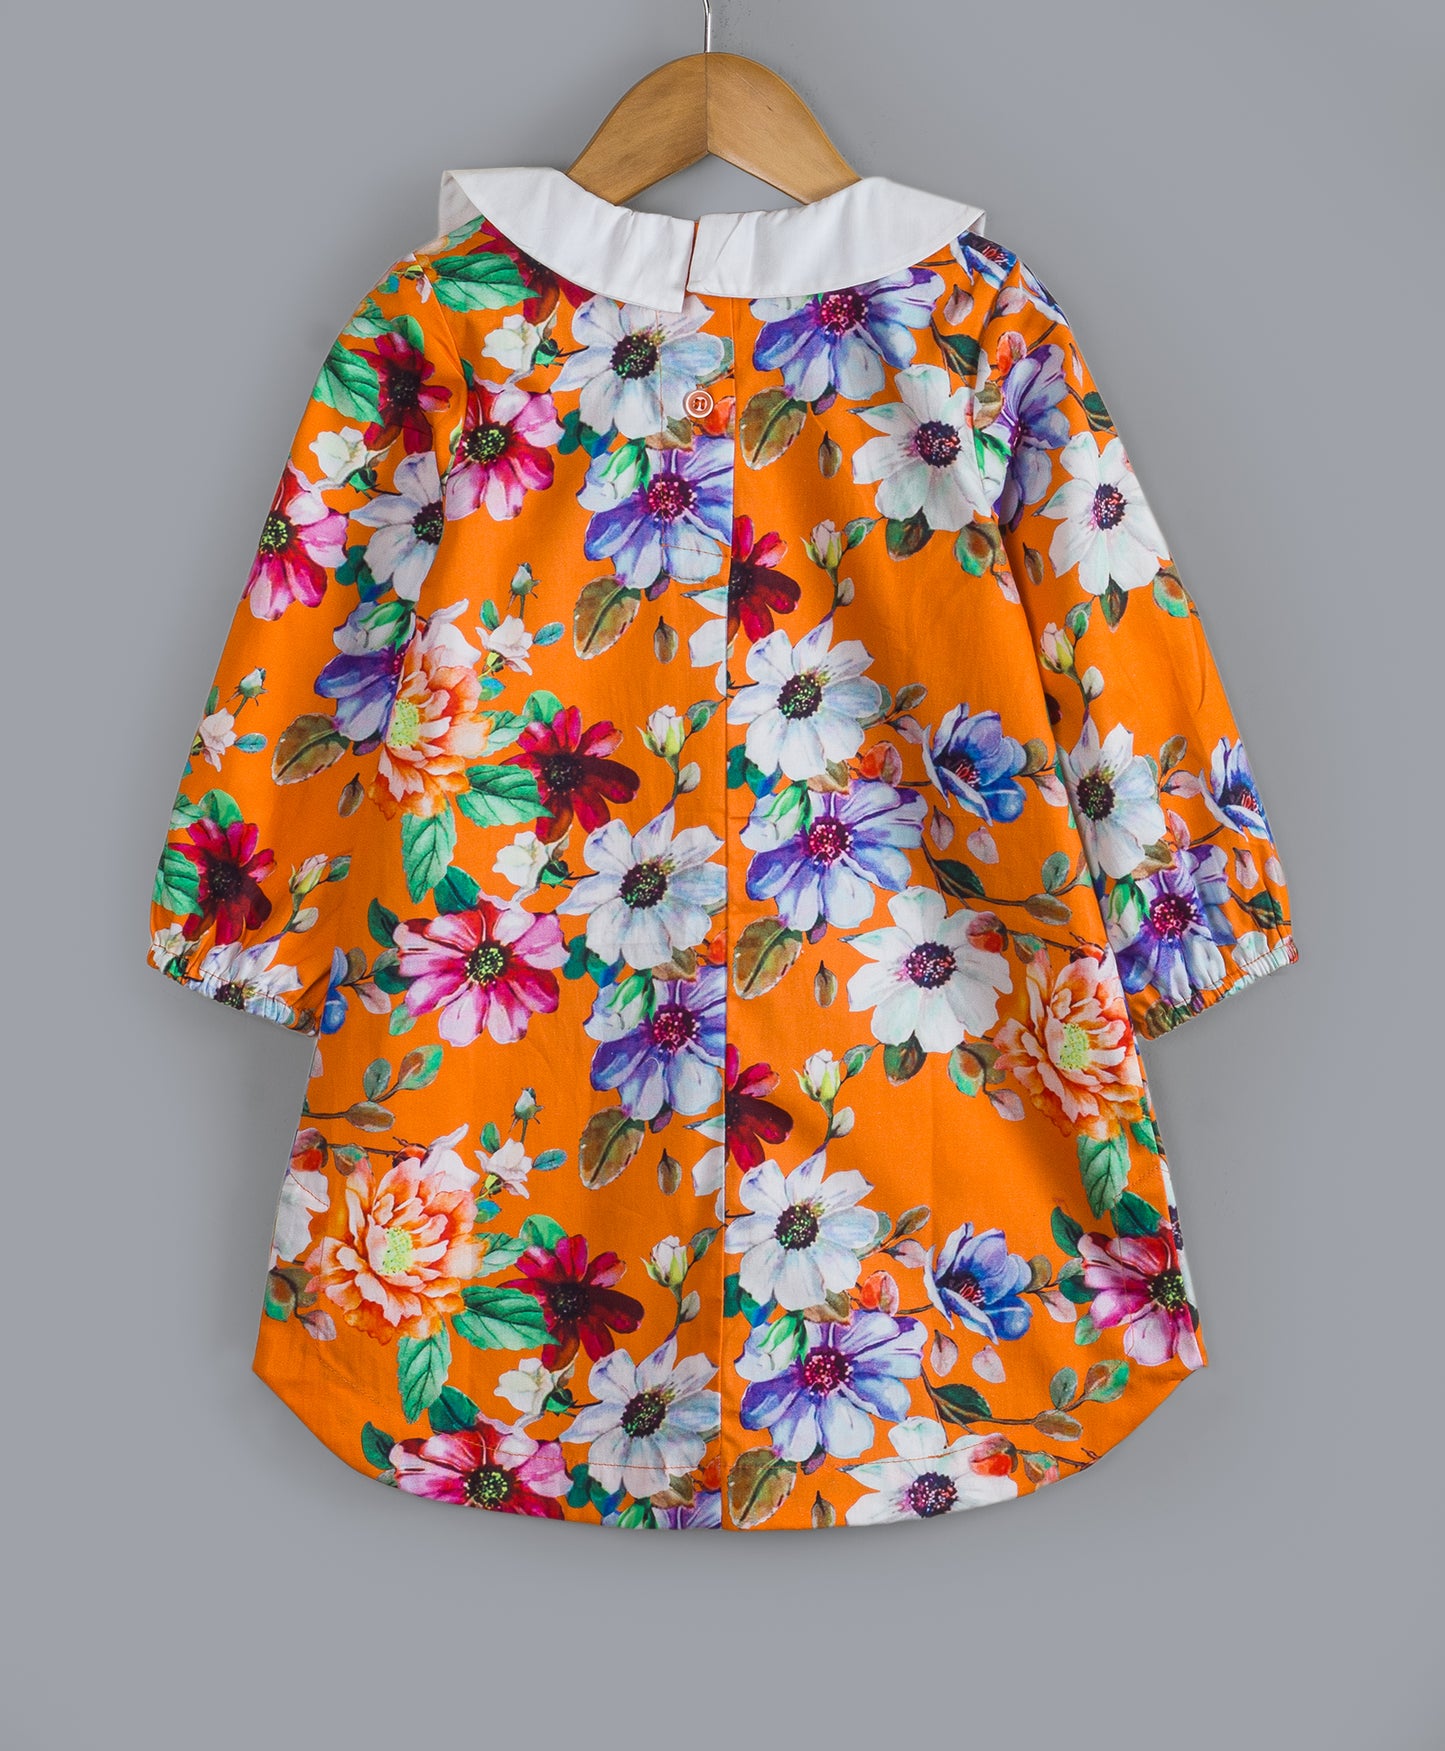 vintage floral dress with contrast collars